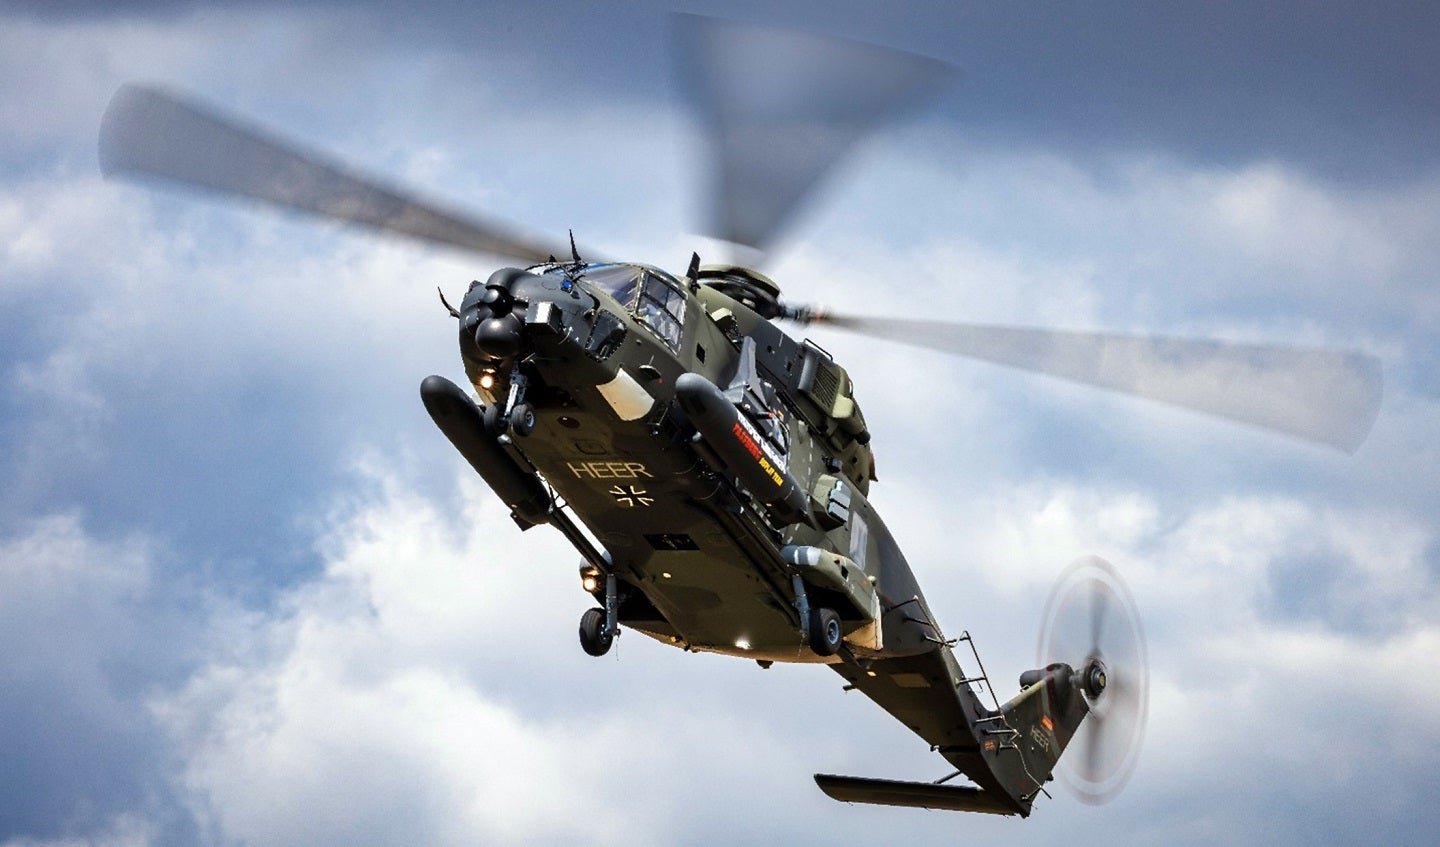 Nato launches upgrade of up to 200 NH90 helicopters